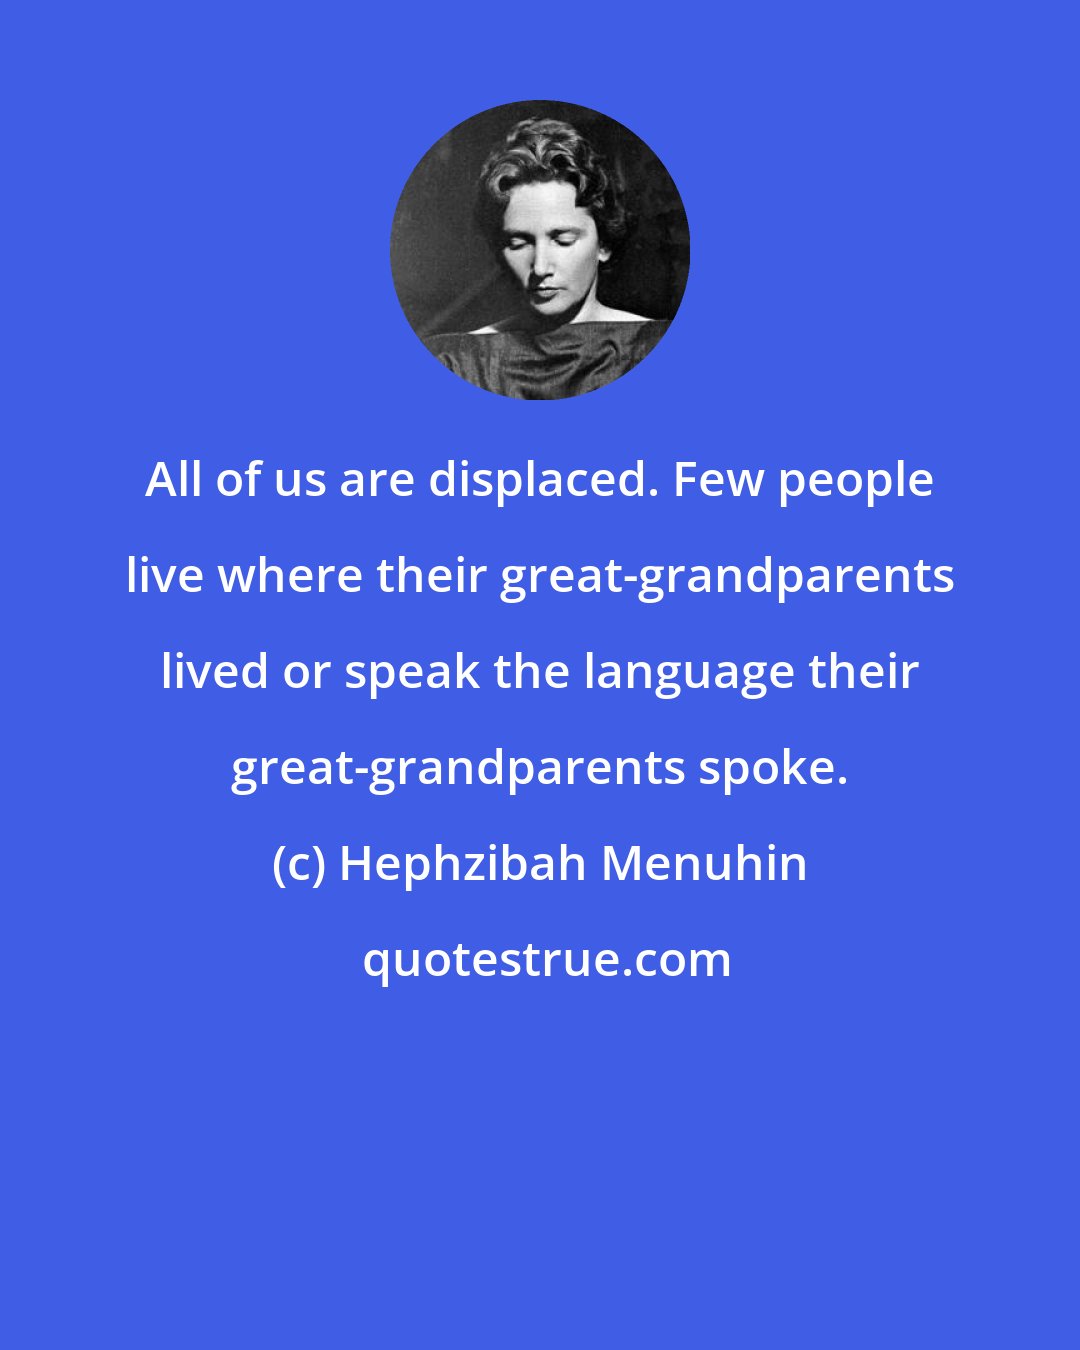 Hephzibah Menuhin: All of us are displaced. Few people live where their great-grandparents lived or speak the language their great-grandparents spoke.